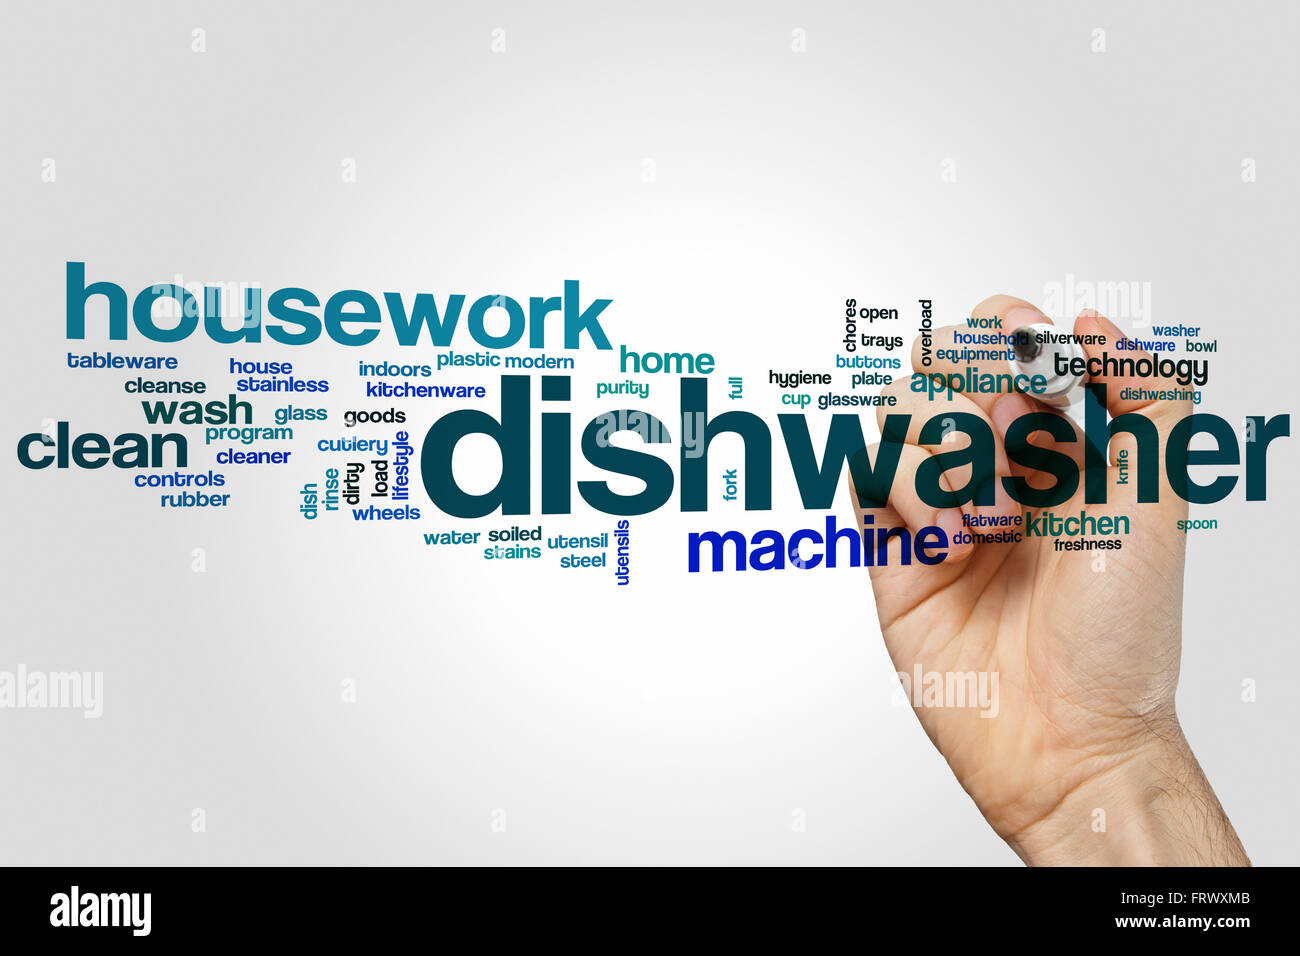 Dishwasher word cloud concept with kitchen appliance related tags Stock Photo